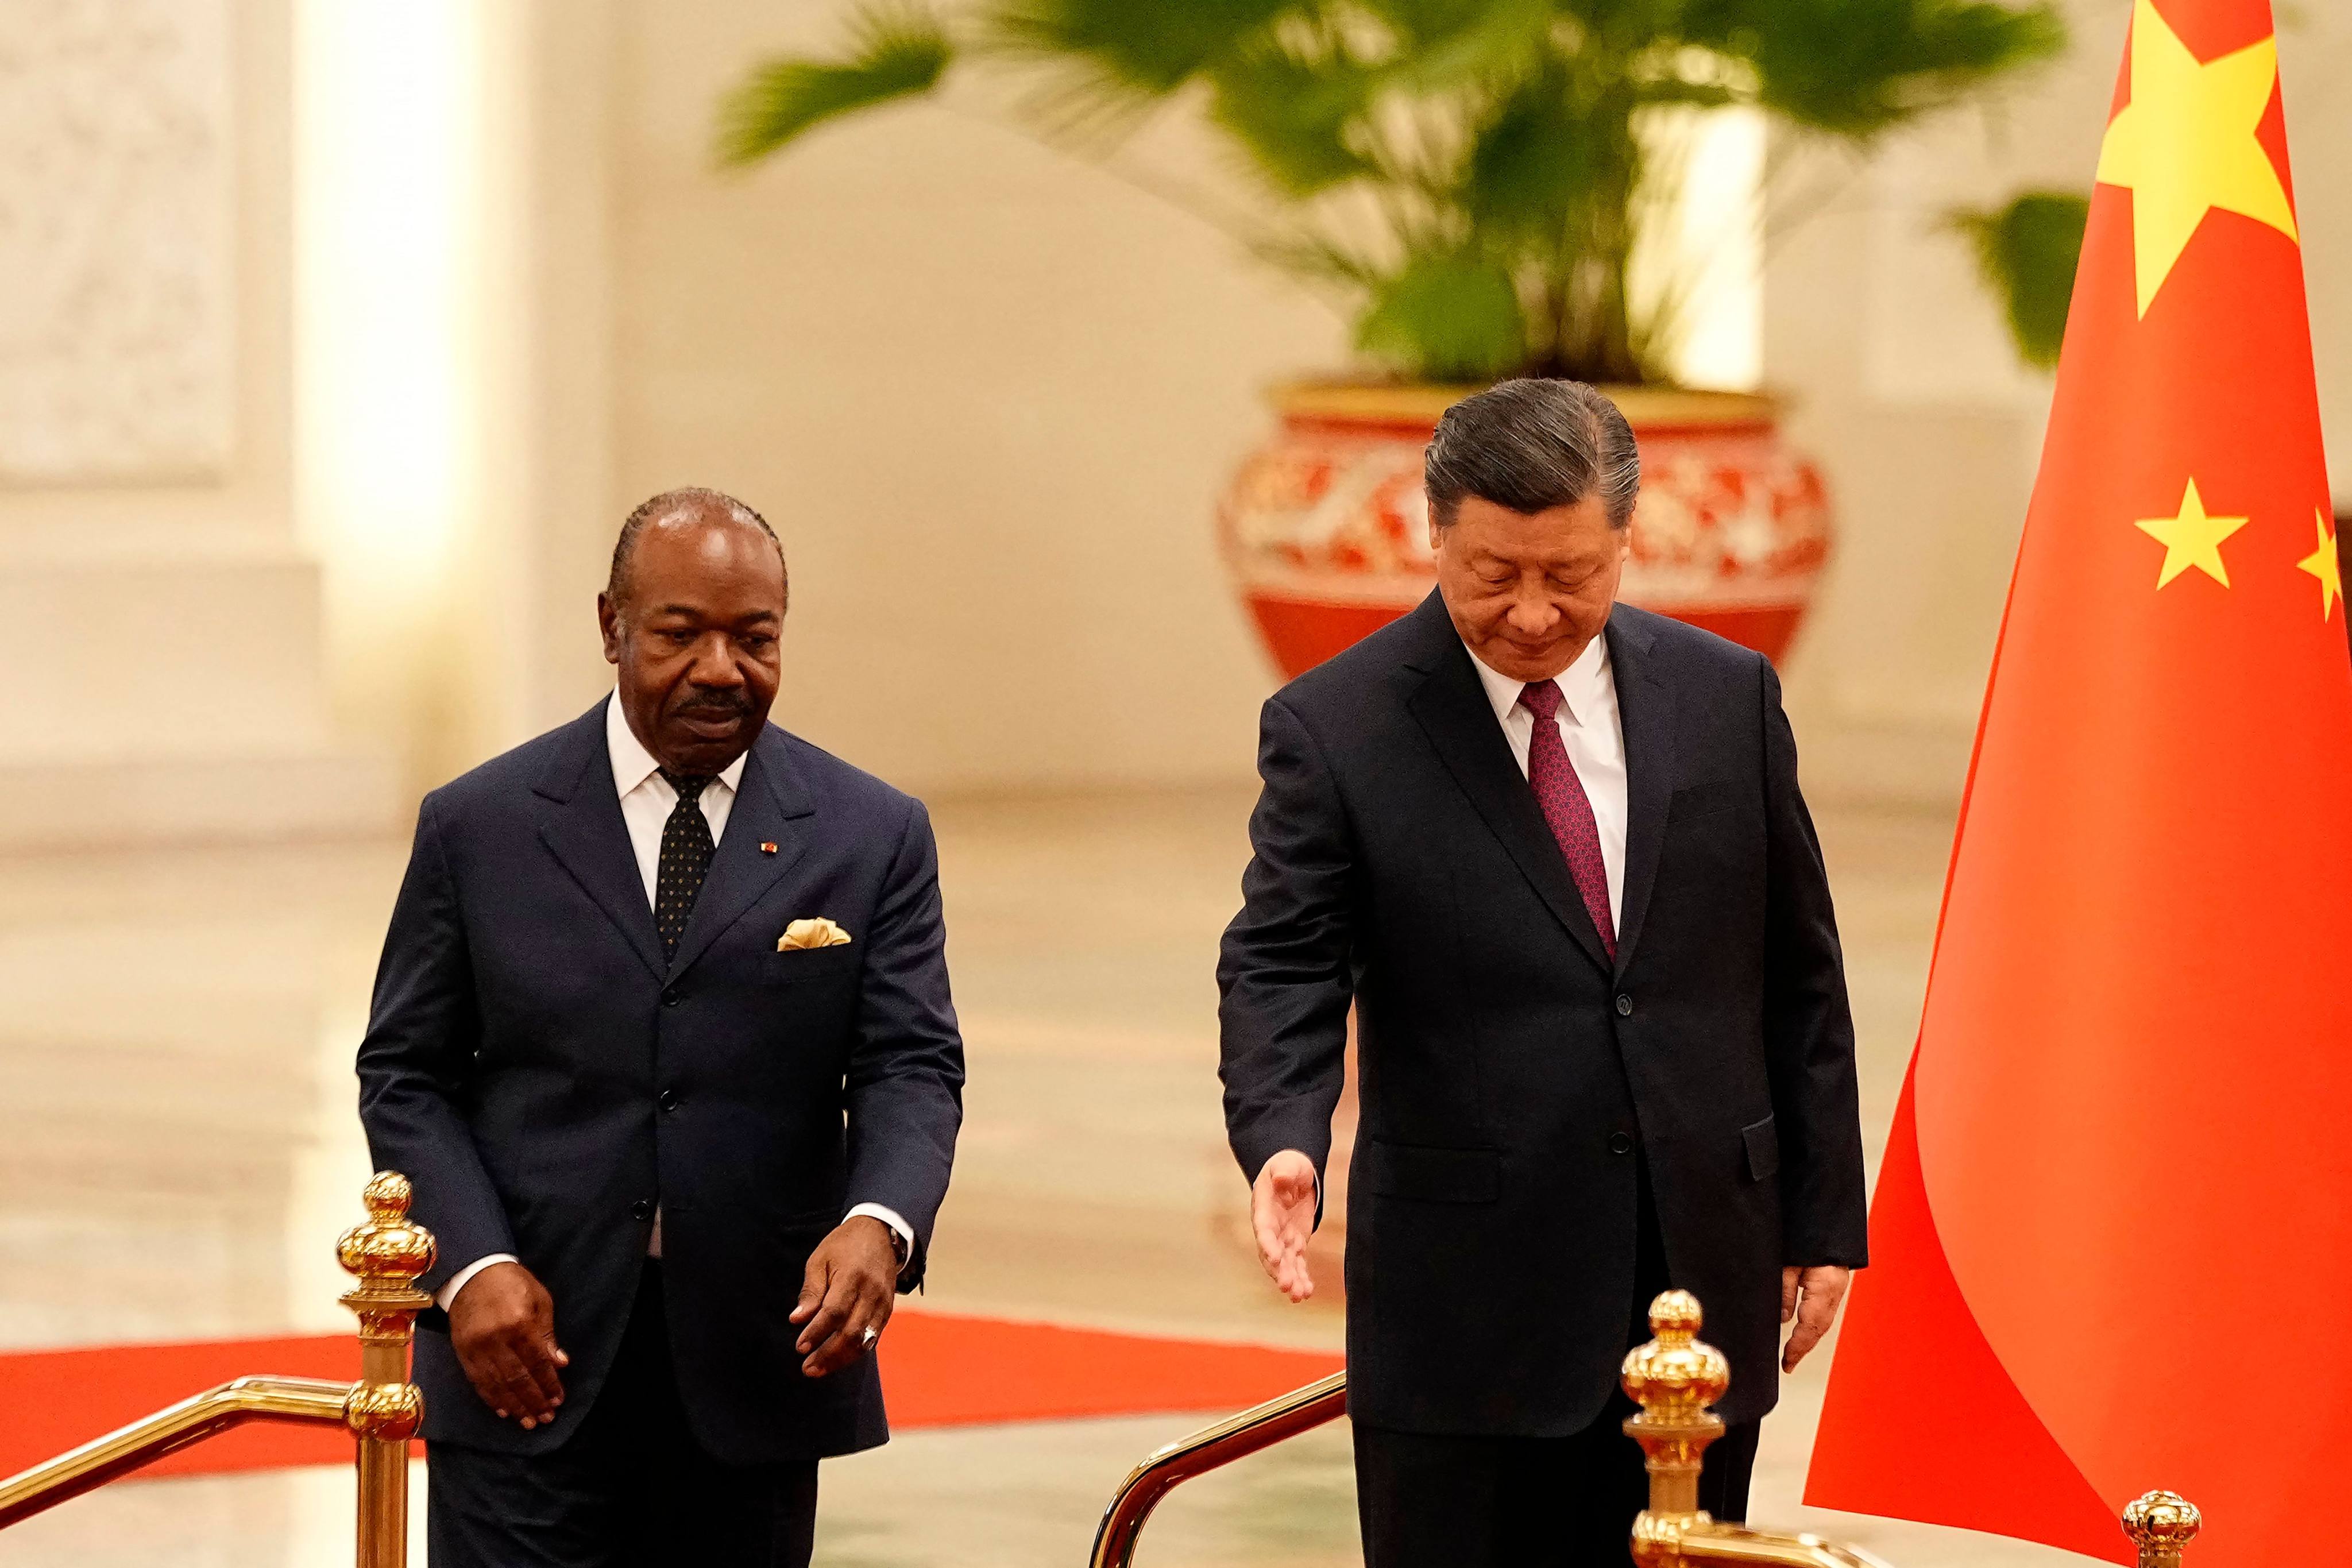 Chinese President Xi Jinping hailed a new strategic cooperation partnership as he and Gabon’s President Ali Bongo Ondimba met in Beijing on Wednesday. Photo: AFP